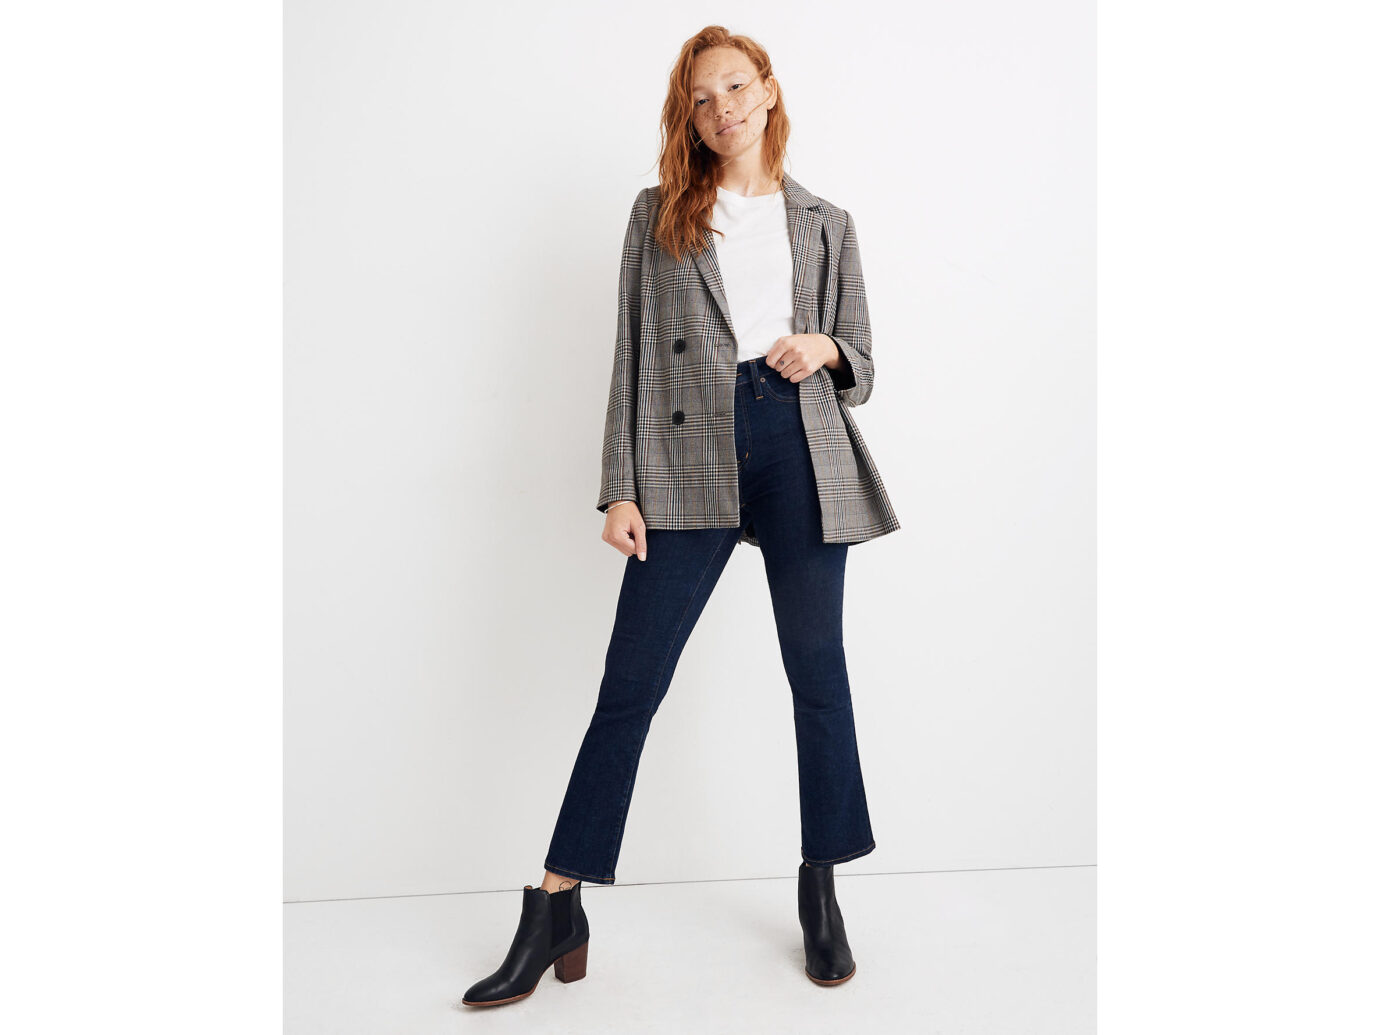 Madewell Caldwell Double-Breasted Blazer in Menswear Plaid